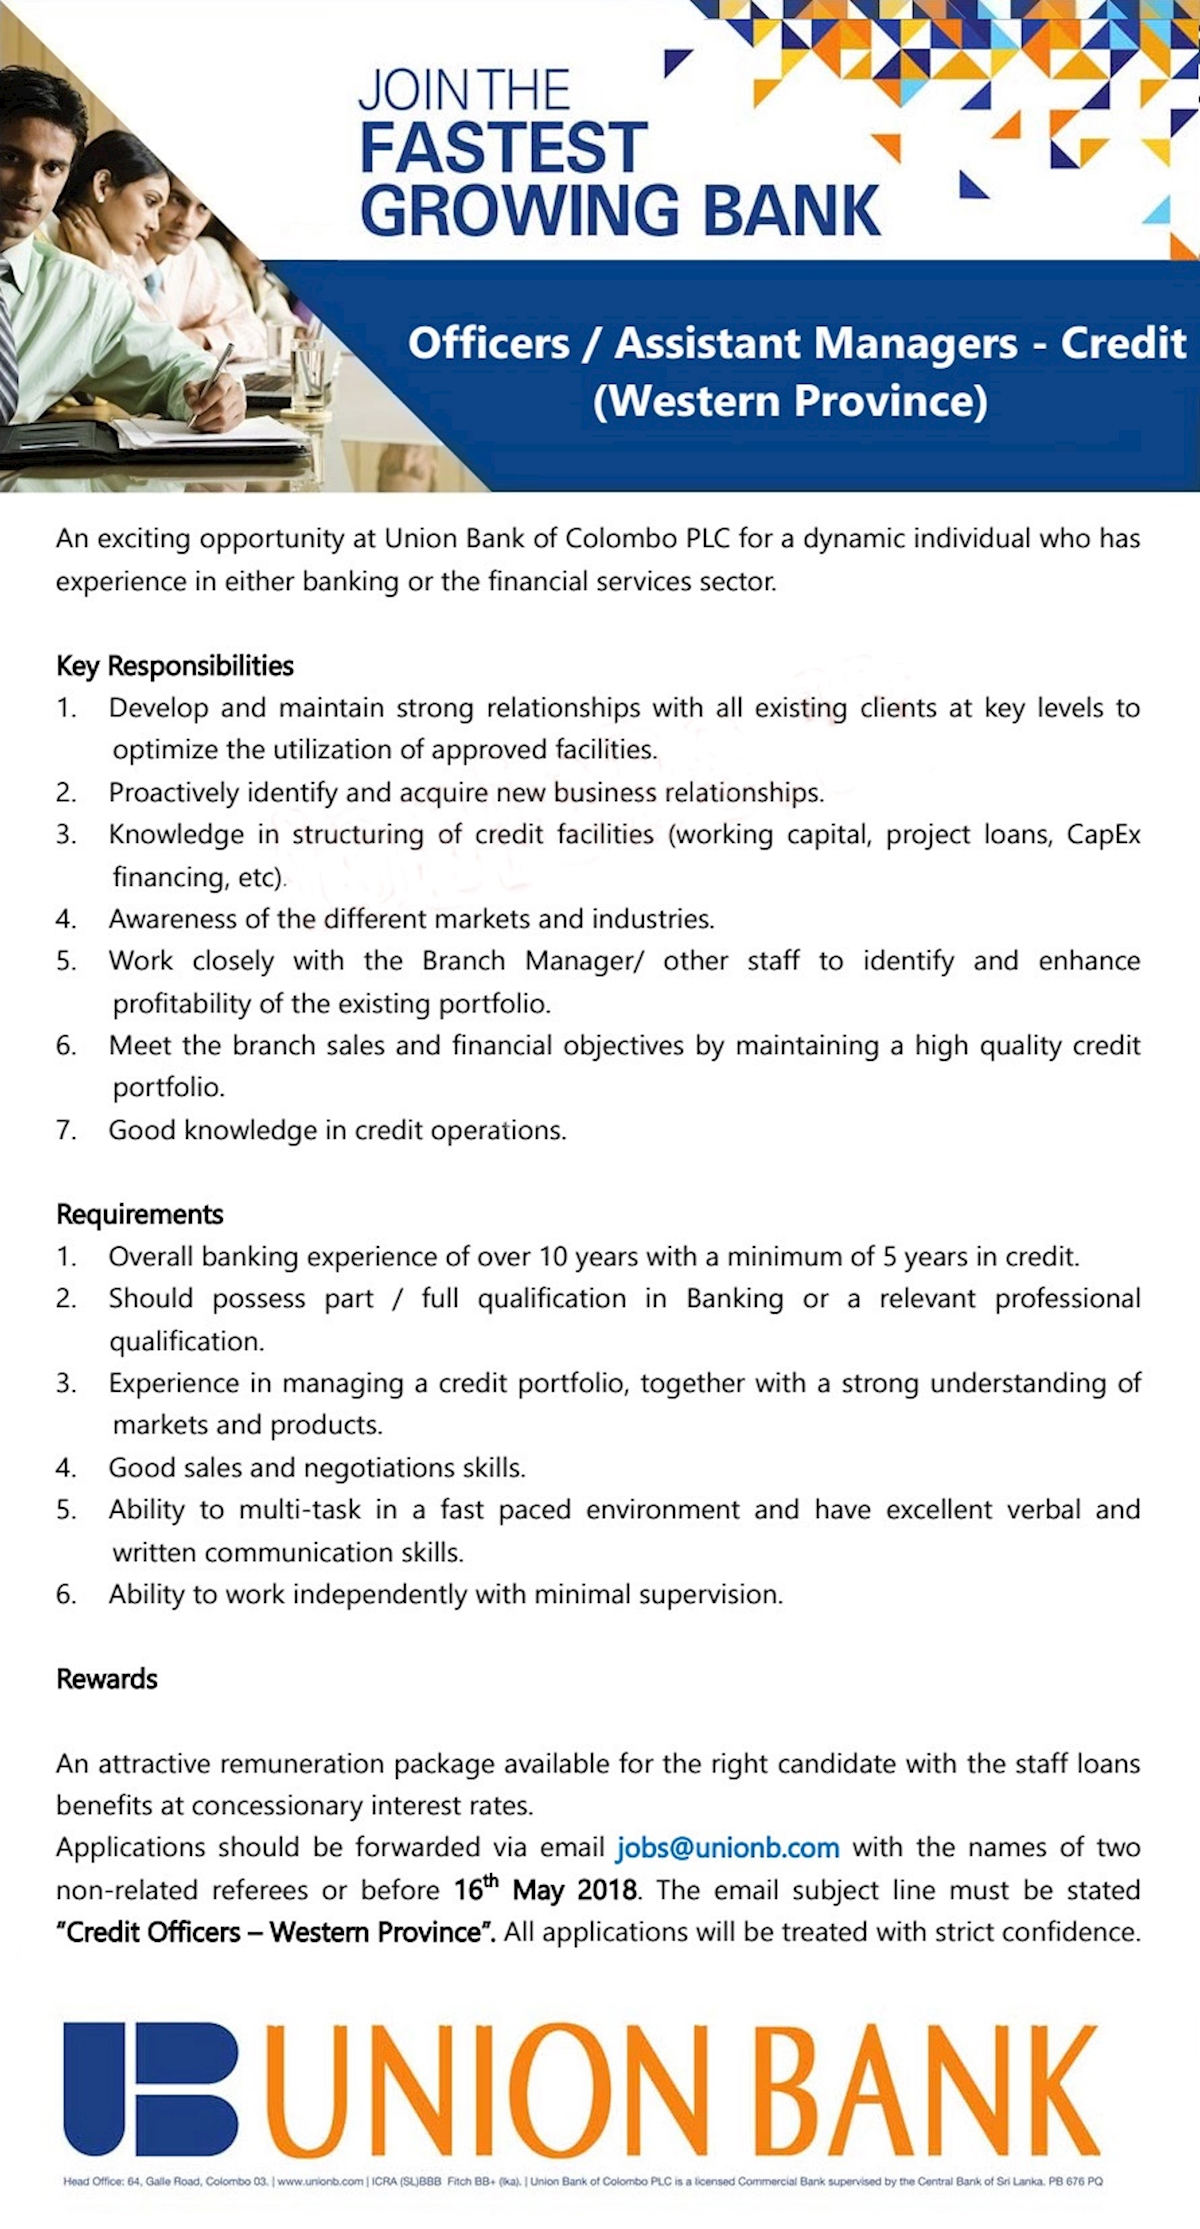 Officers / Assistant Managers - Credit (Western Province)